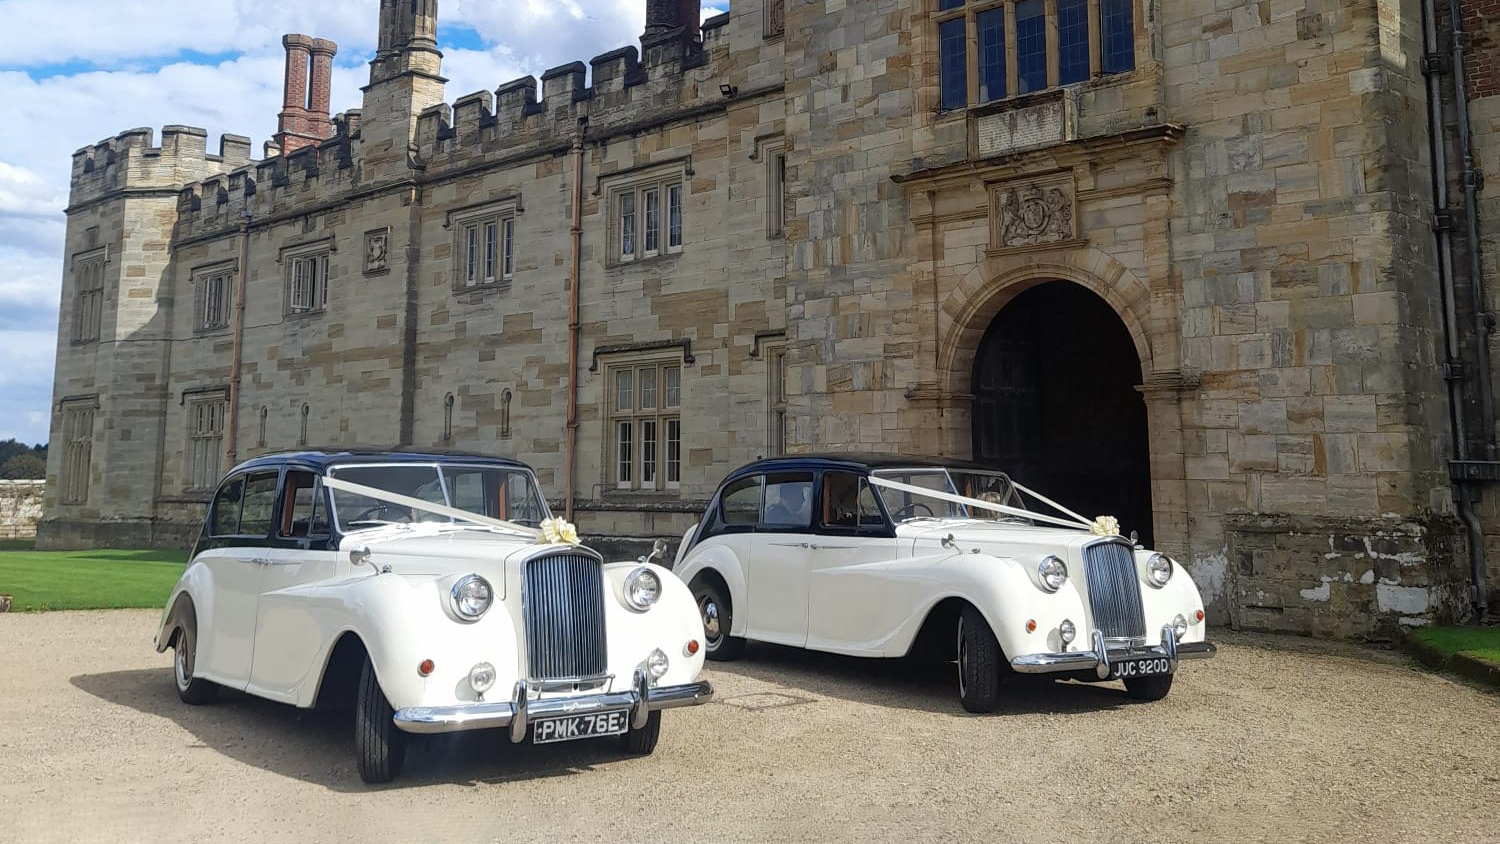 Two Classic Austin Princess Limousine decorated with Ivory Ribbons and Bows on top of the front grill. Vehicles are parked in front of a large manor house in Maidstone